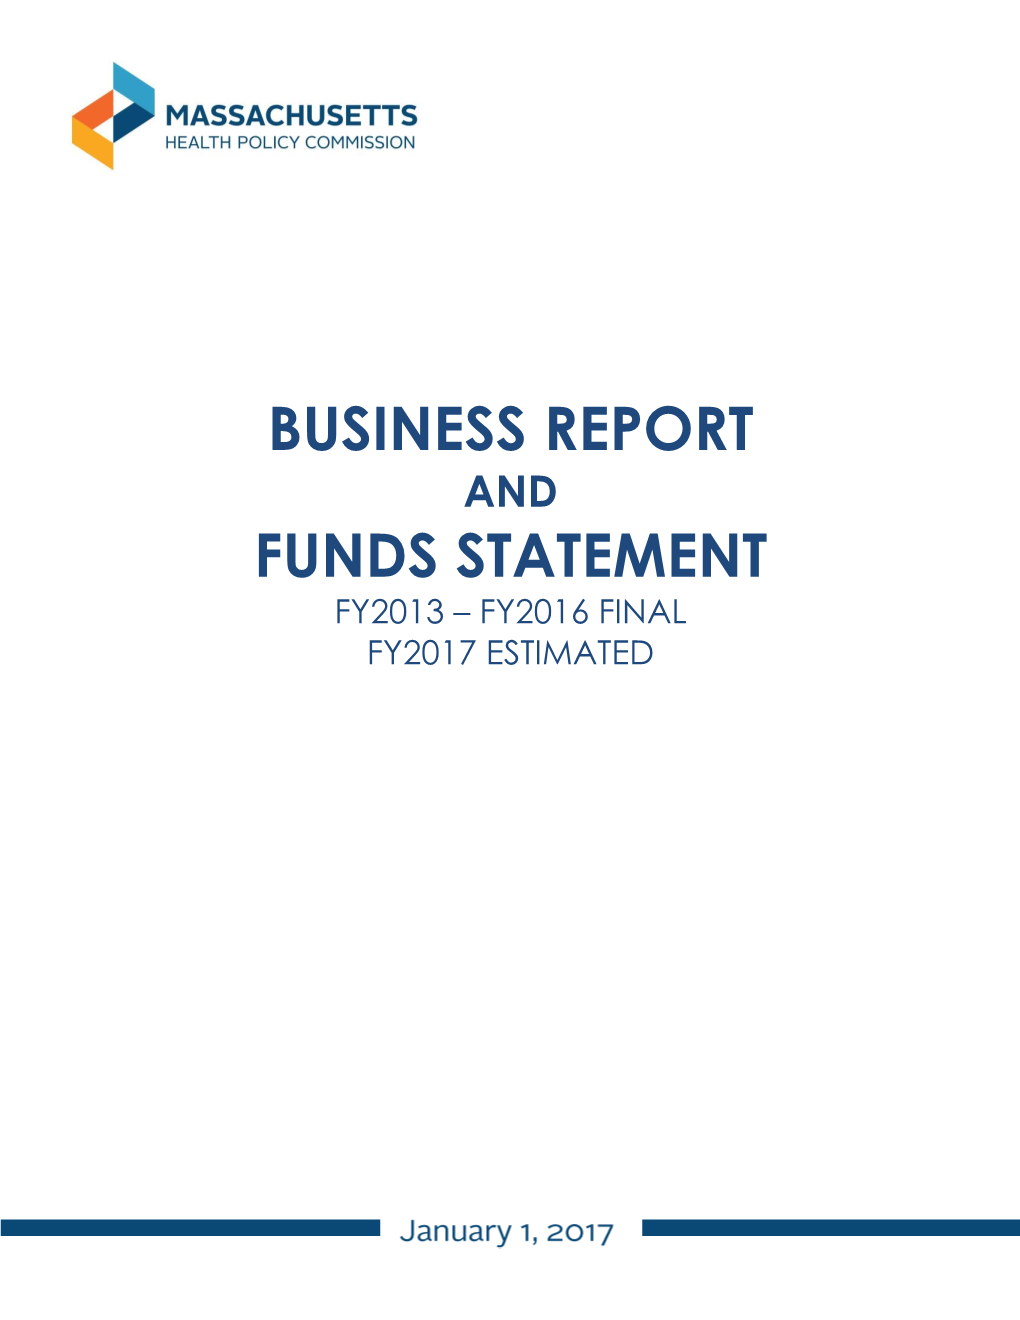 Business Report Funds Statement